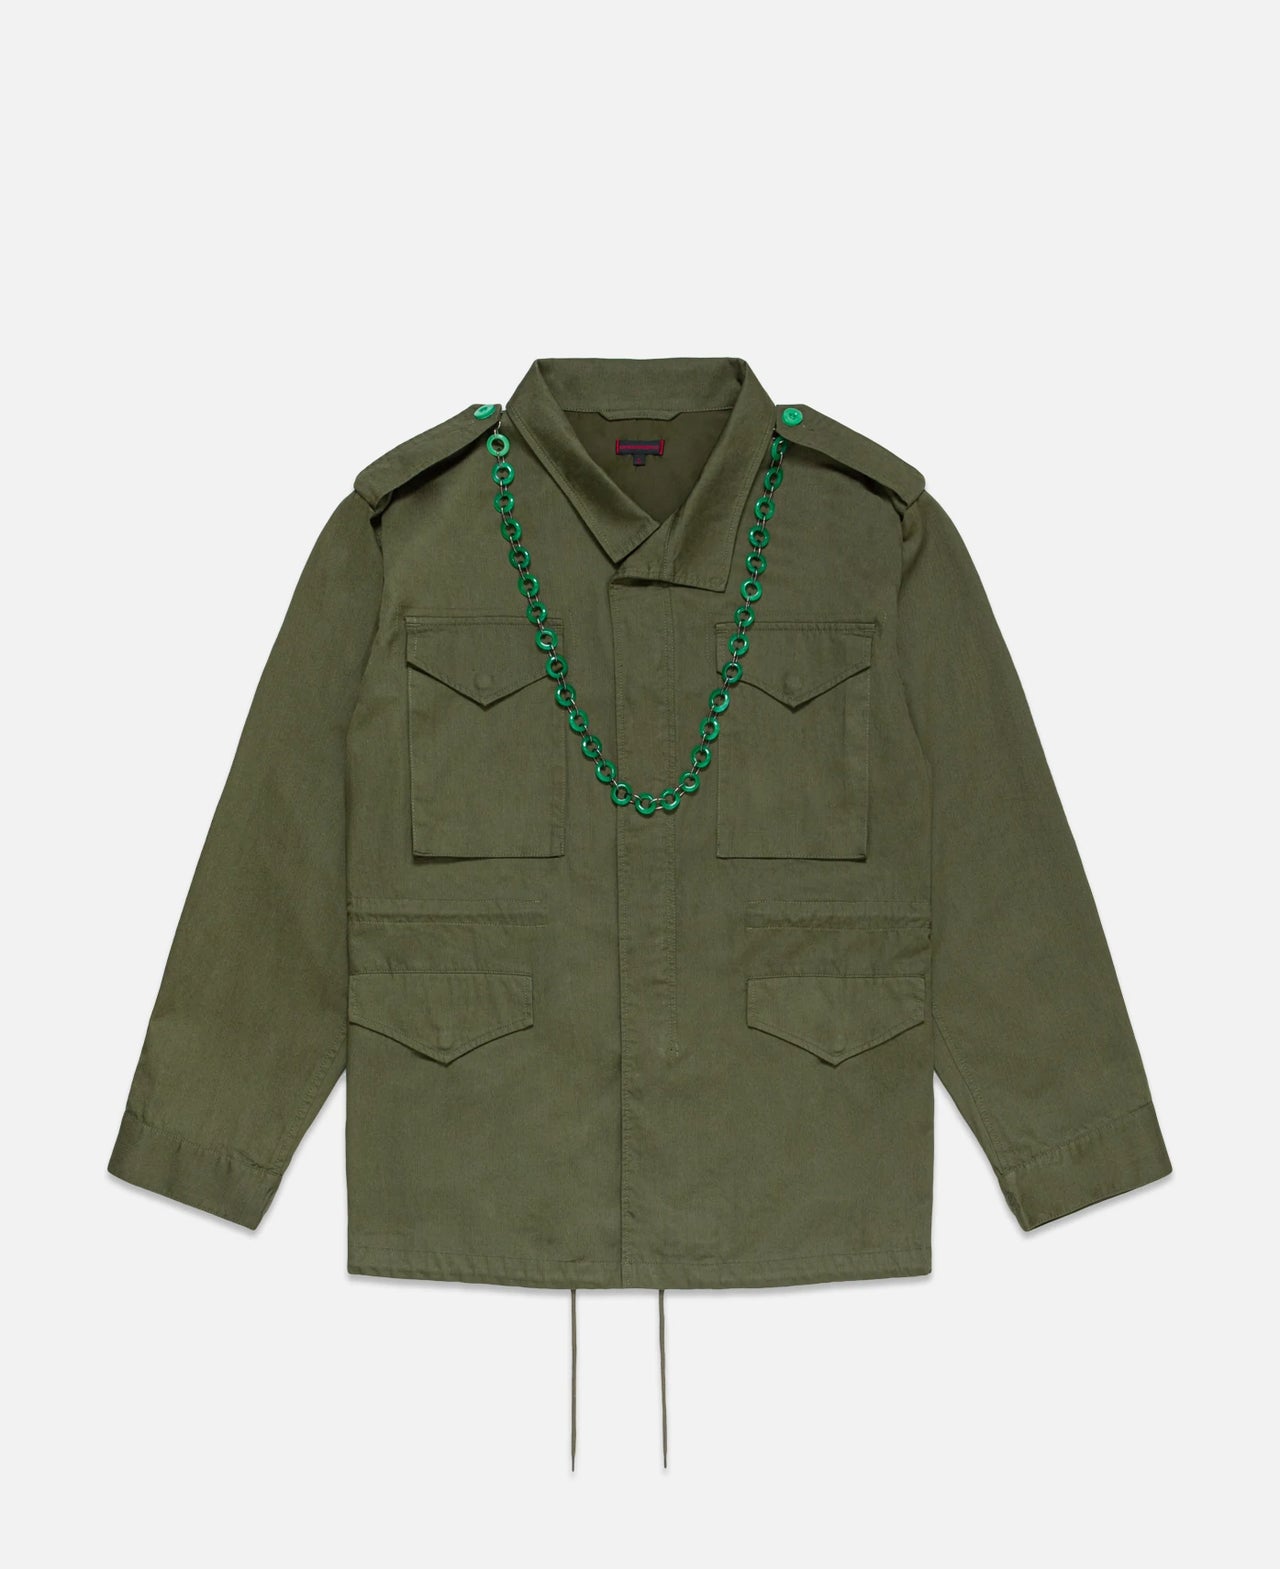 M65 Army Jacket - Olive | ONLINE ONLY